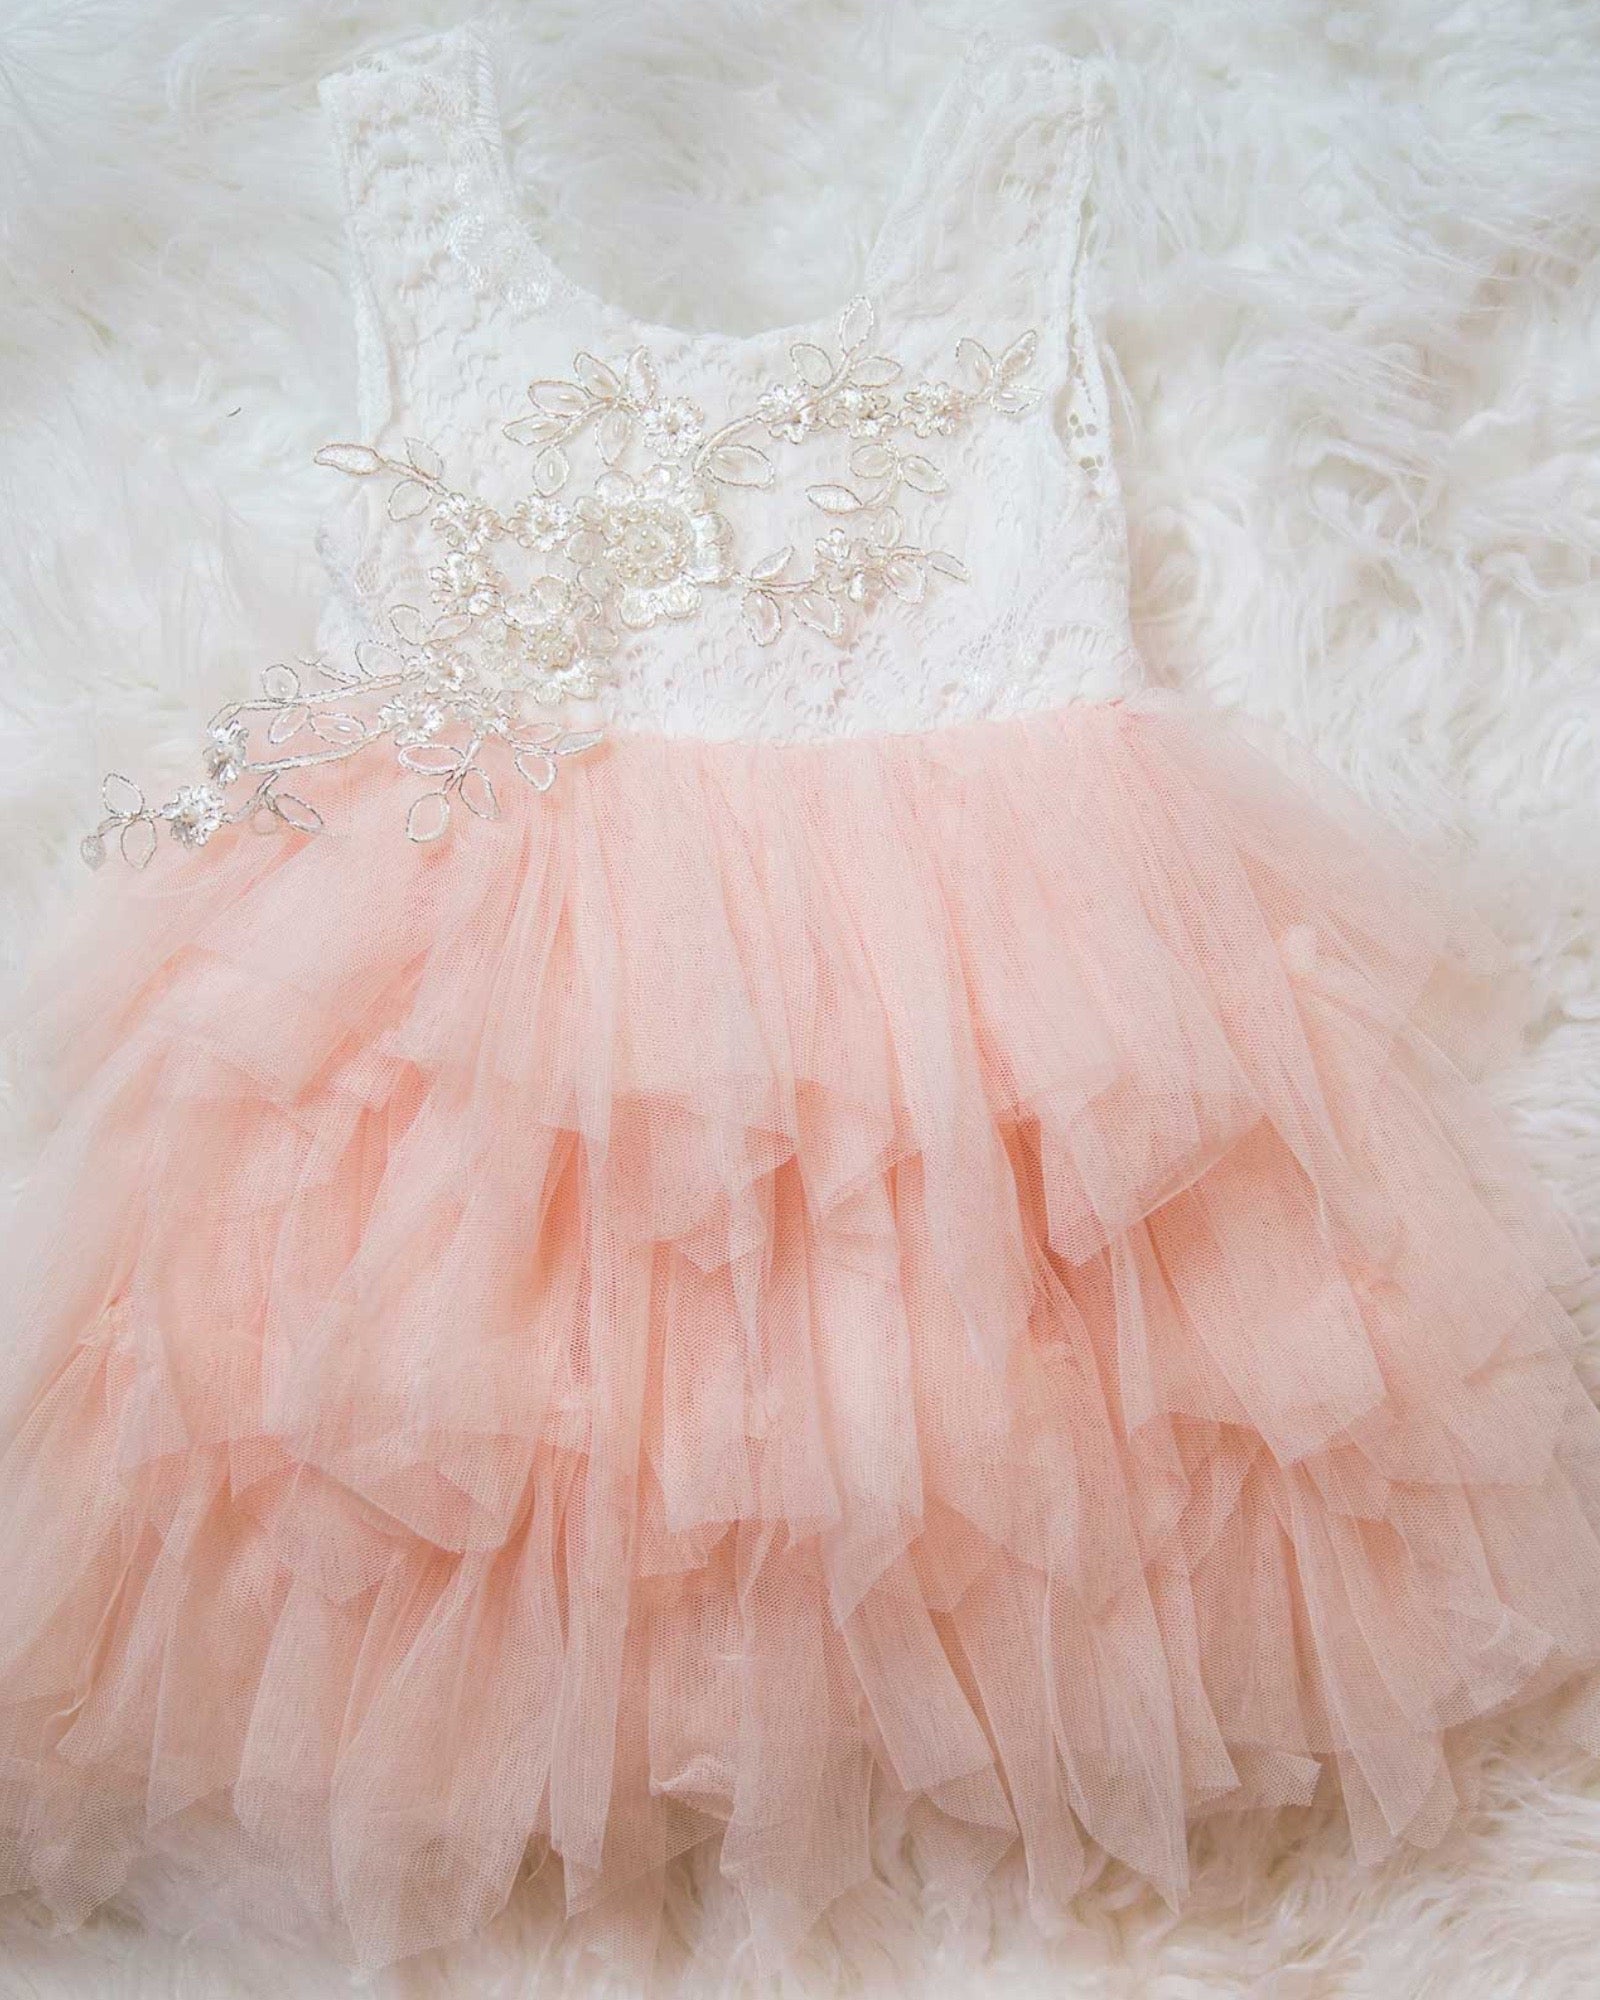 Vintage Tulle And Lace Dress - Short